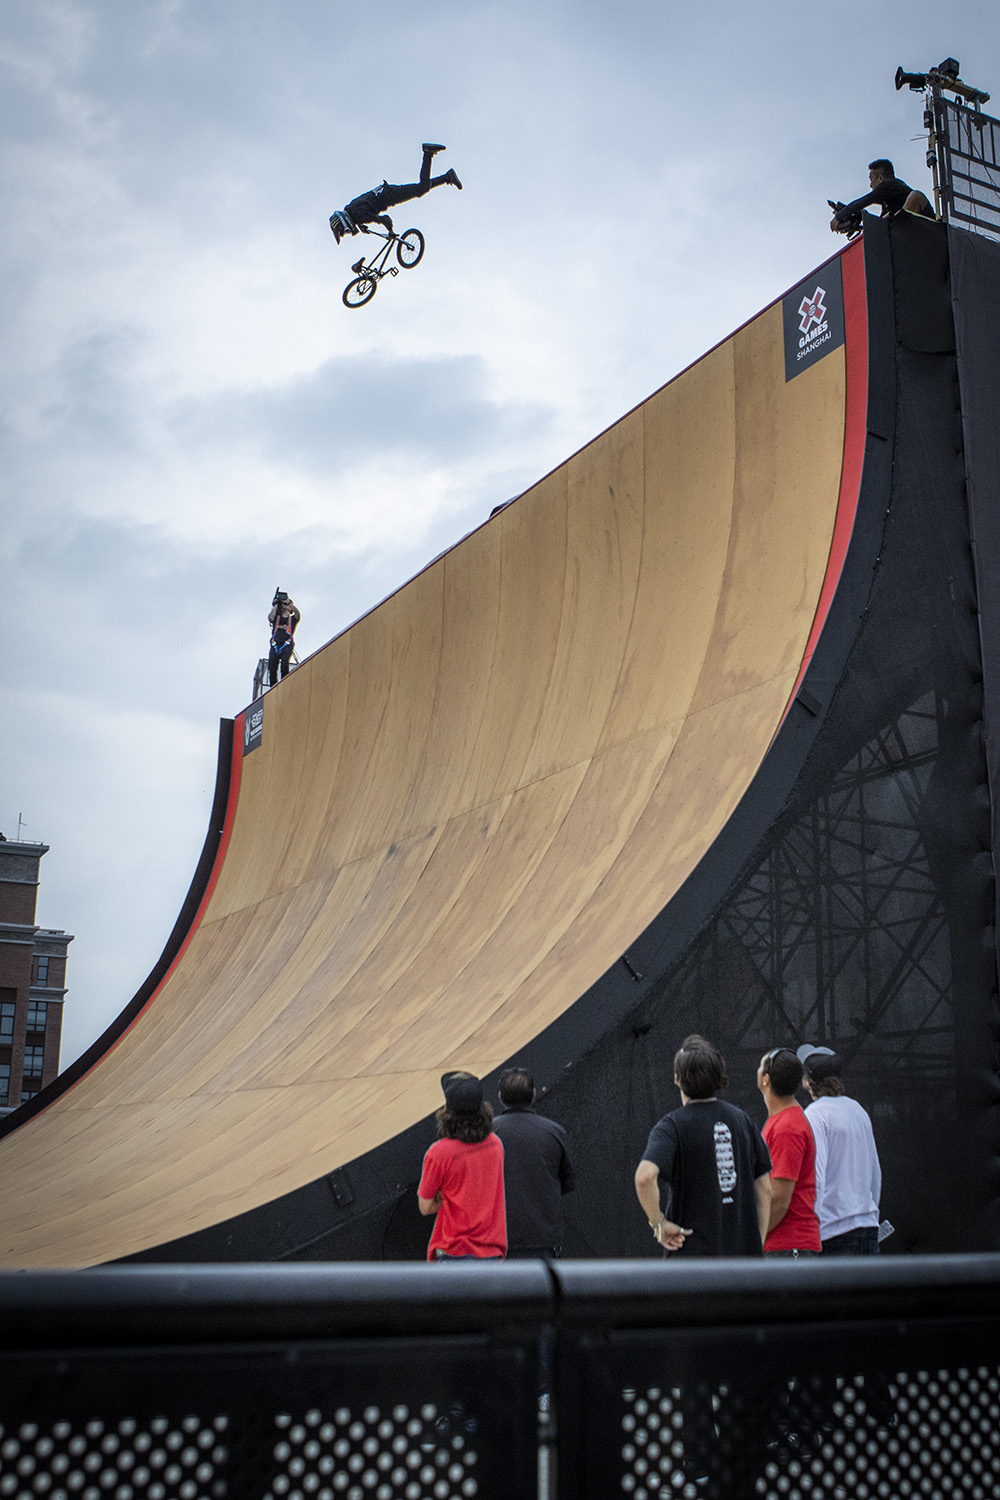 Monster Energy's James Foster Takes Bronze in BMX Big Air at X Games Shanghai 2019